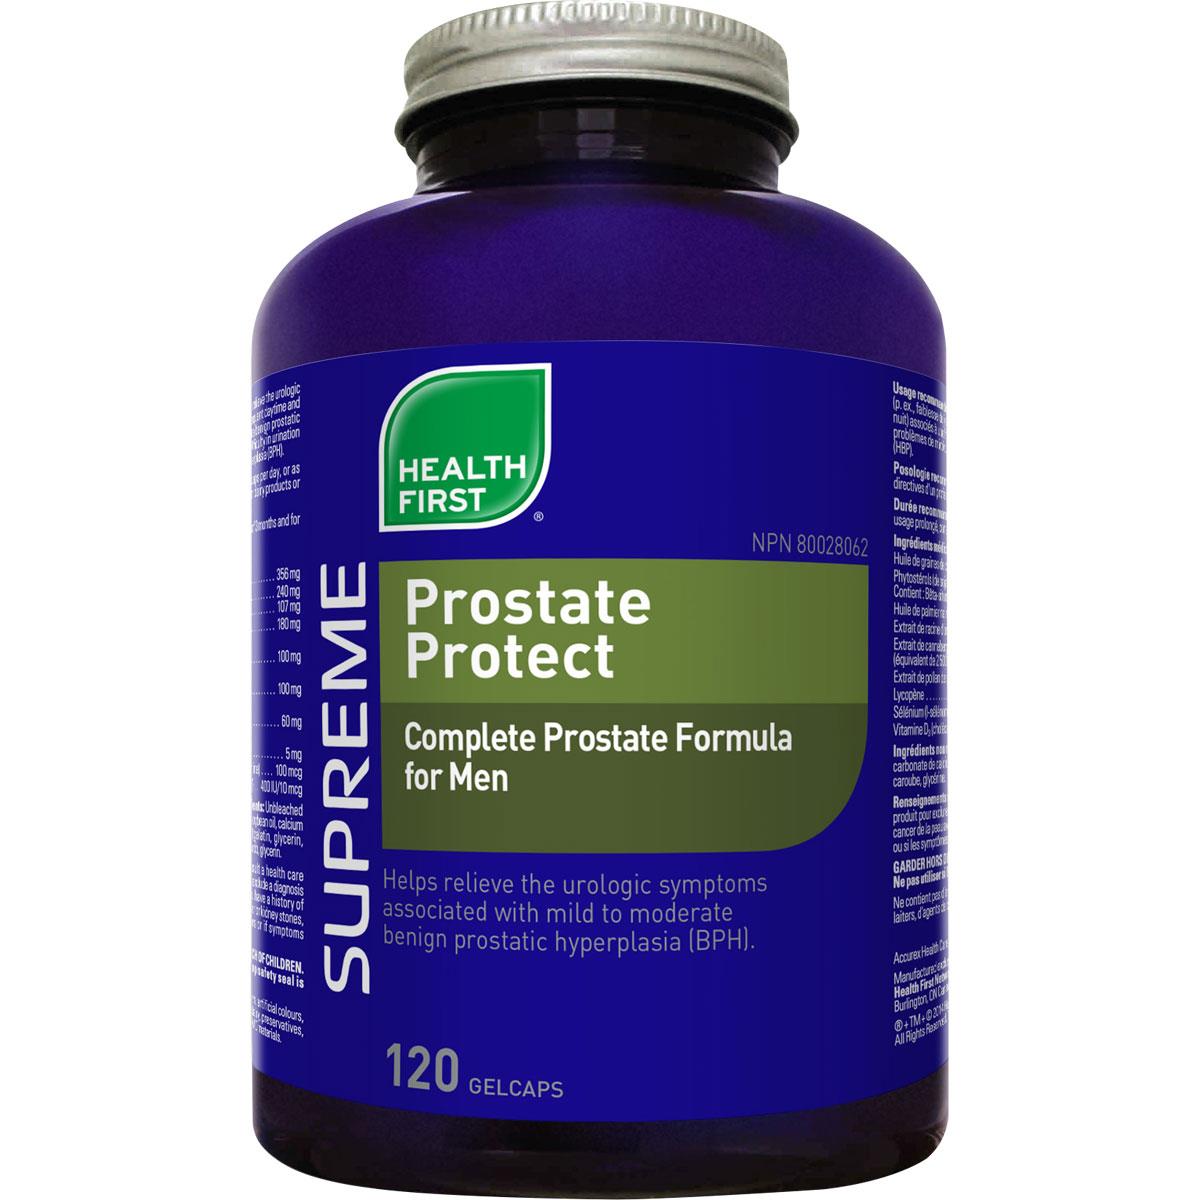 Health First Prostate Protect, 120 Gelcaps